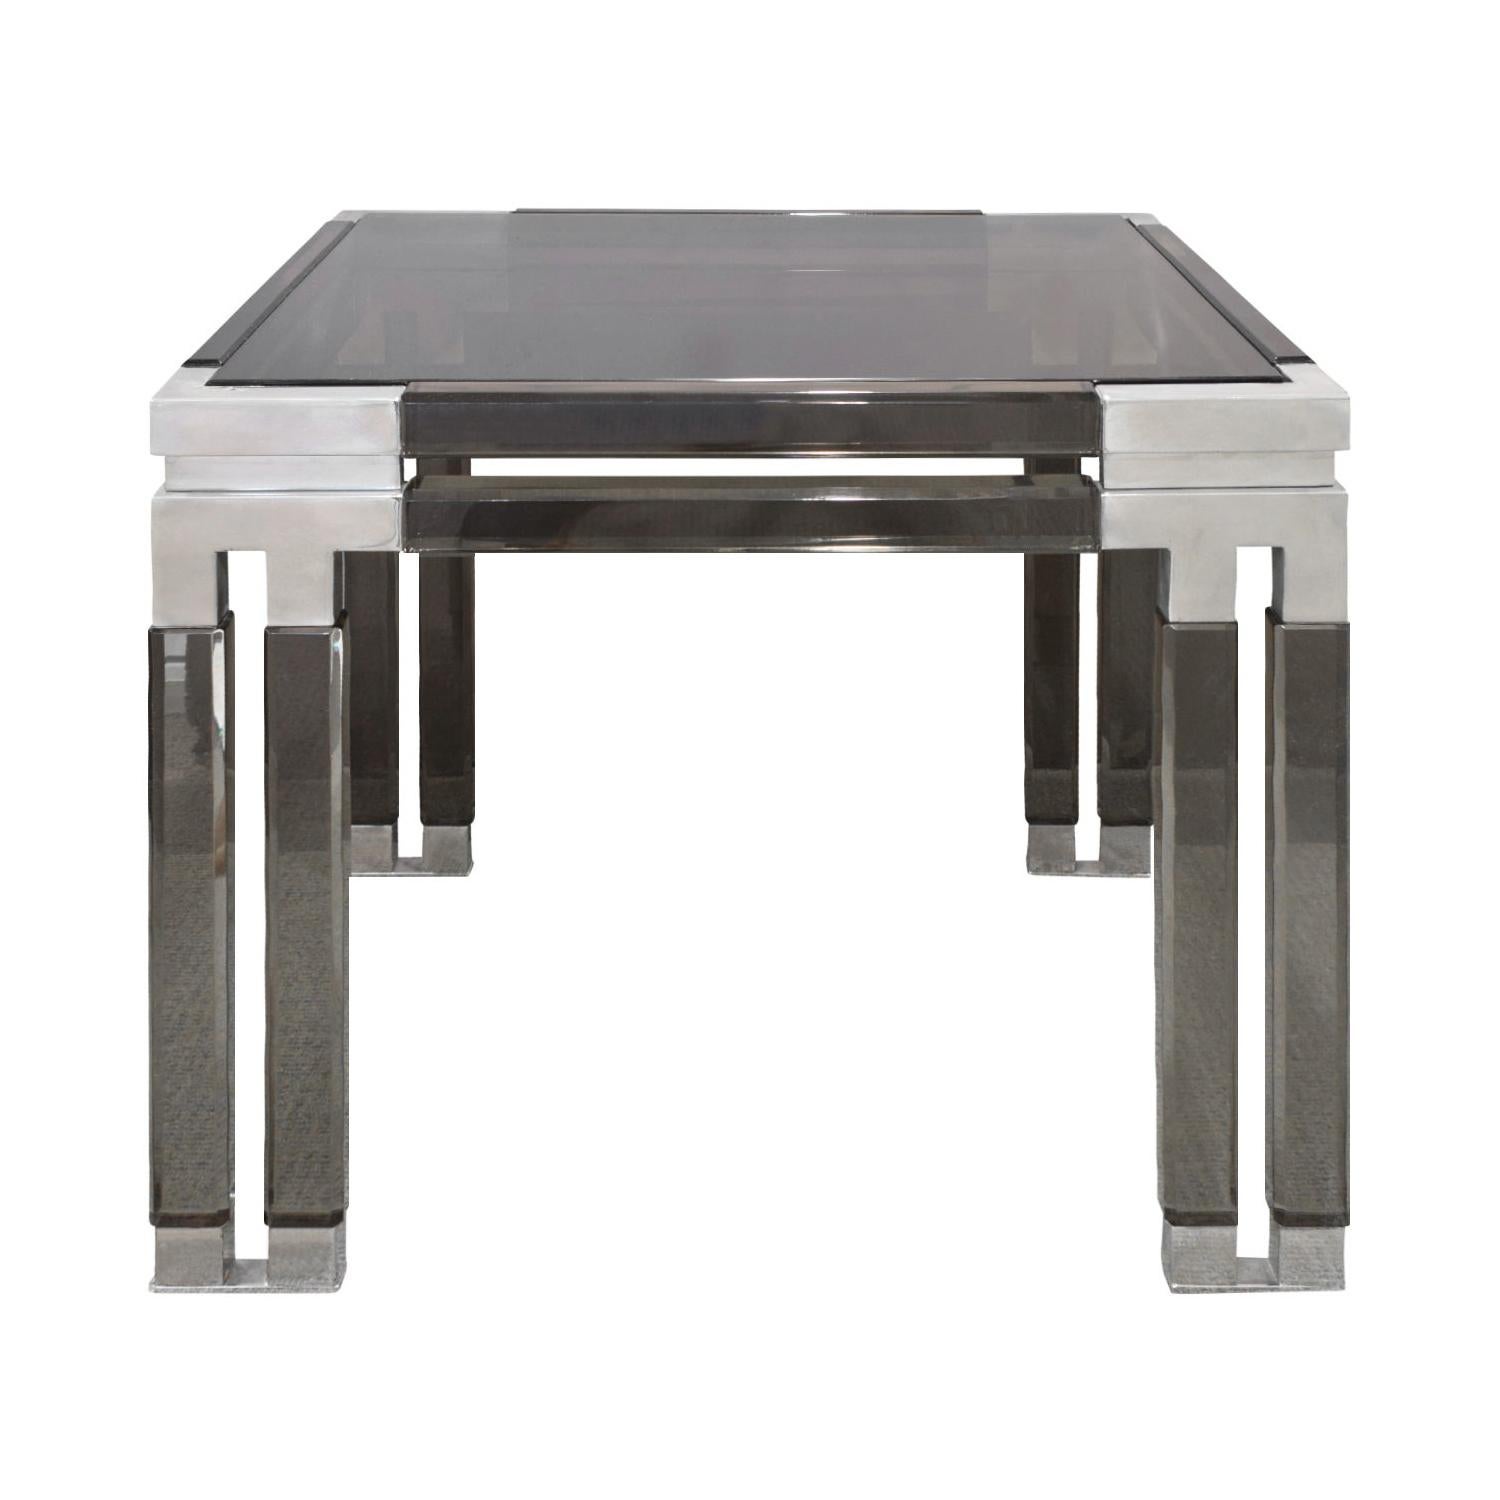 Paul Laszlo Chic Side Table in Smoke Lucite and Chrome, 1983